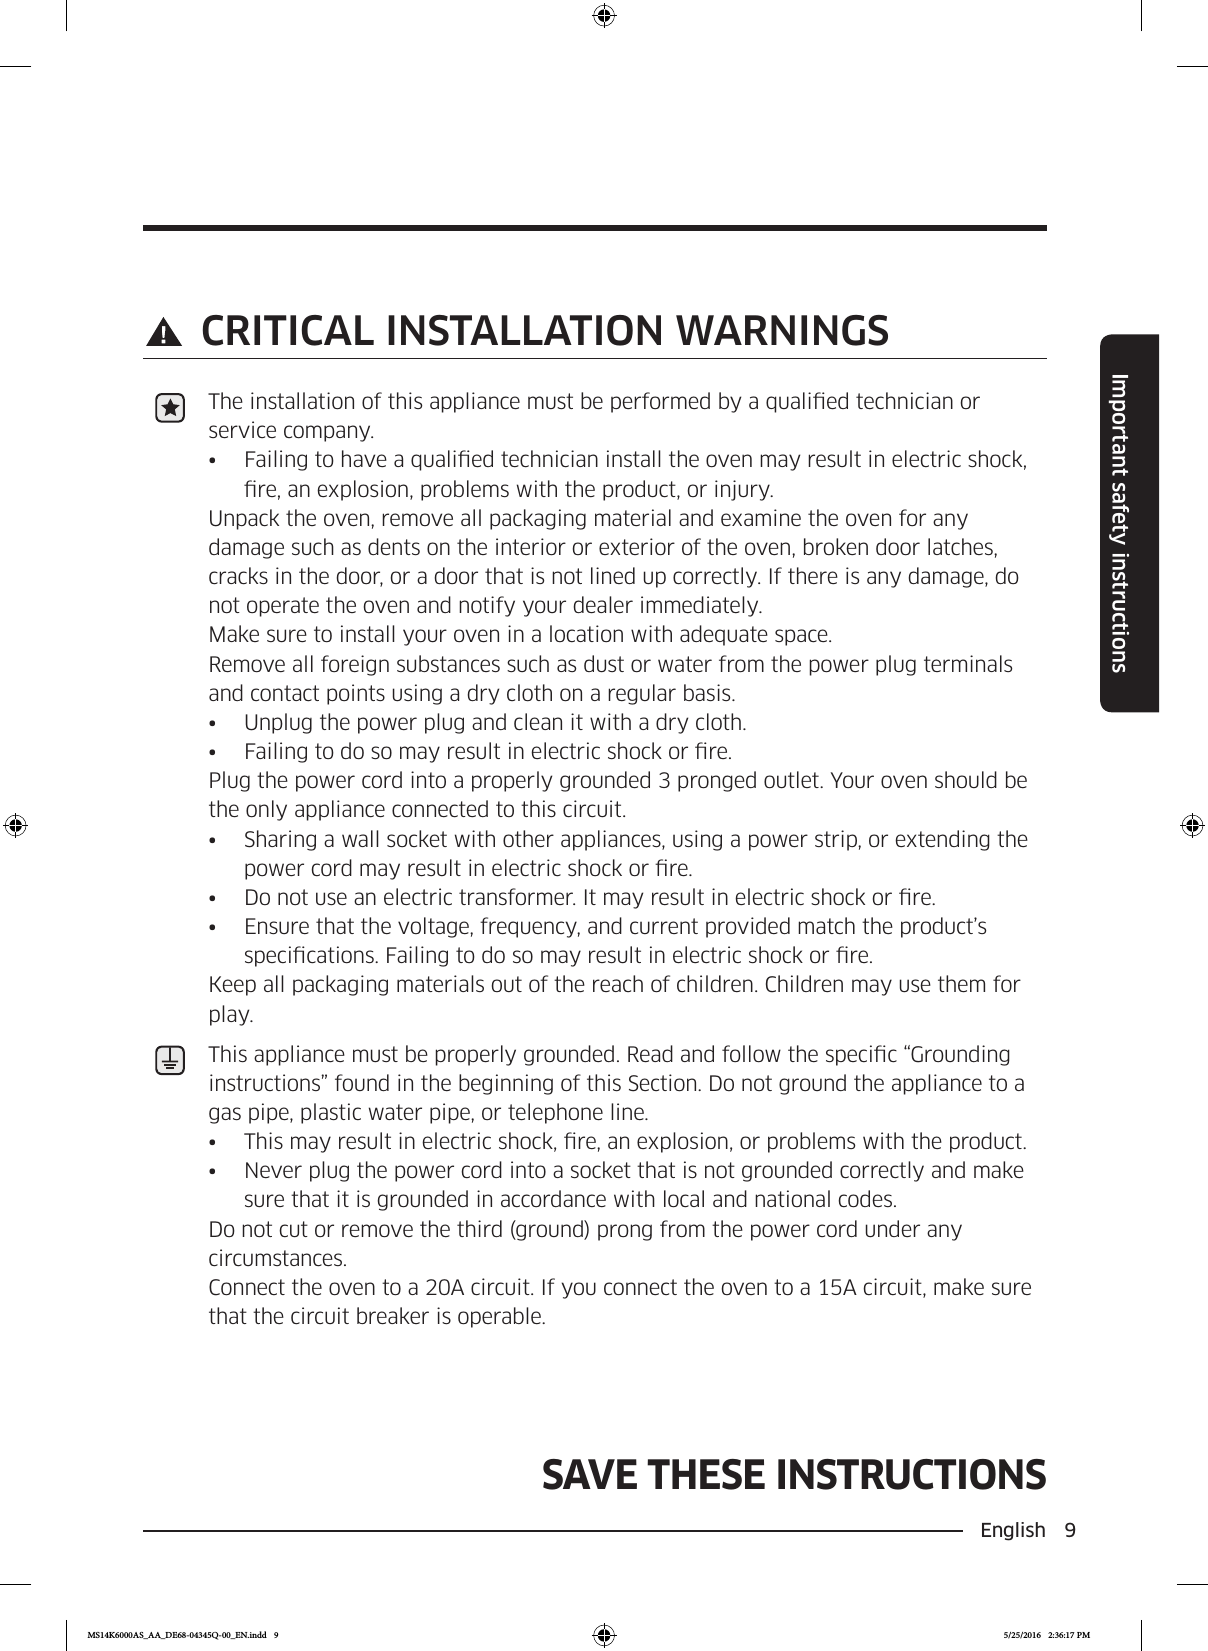 English  9Important safety instructionsSAVE THESE INSTRUCTIONSSAVE THESE INSTRUCTIONS CRITICAL INSTALLATION WARNINGSThe installation of this appliance must be performed by a qualied technician or service company.•  Failing to have a qualied technician install the oven may result in electric shock, re, an explosion, problems with the product, or injury.Unpack the oven, remove all packaging material and examine the oven for any damage such as dents on the interior or exterior of the oven, broken door latches, cracks in the door, or a door that is not lined up correctly. If there is any damage, do not operate the oven and notify your dealer immediately.Make sure to install your oven in a location with adequate space. Remove all foreign substances such as dust or water from the power plug terminals and contact points using a dry cloth on a regular basis.•  Unplug the power plug and clean it with a dry cloth.•  Failing to do so may result in electric shock or re.Plug the power cord into a properly grounded 3 pronged outlet. Your oven should be the only appliance connected to this circuit.•  Sharing a wall socket with other appliances, using a power strip, or extending the power cord may result in electric shock or re.•  Do not use an electric transformer. It may result in electric shock or re.•  Ensure that the voltage, frequency, and current provided match the product’s specications. Failing to do so may result in electric shock or re.Keep all packaging materials out of the reach of children. Children may use them for play.This appliance must be properly grounded. Read and follow the specic “Grounding instructions” found in the beginning of this Section. Do not ground the appliance to a gas pipe, plastic water pipe, or telephone line.•  This may result in electric shock, re, an explosion, or problems with the product.•  Never plug the power cord into a socket that is not grounded correctly and make sure that it is grounded in accordance with local and national codes.Do not cut or remove the third (ground) prong from the power cord under any circumstances. Connect the oven to a 20A circuit. If you connect the oven to a 15A circuit, make sure that the circuit breaker is operable.MS14K6000AS_AA_DE68-04345Q-00_EN.indd   9 5/25/2016   2:36:17 PM